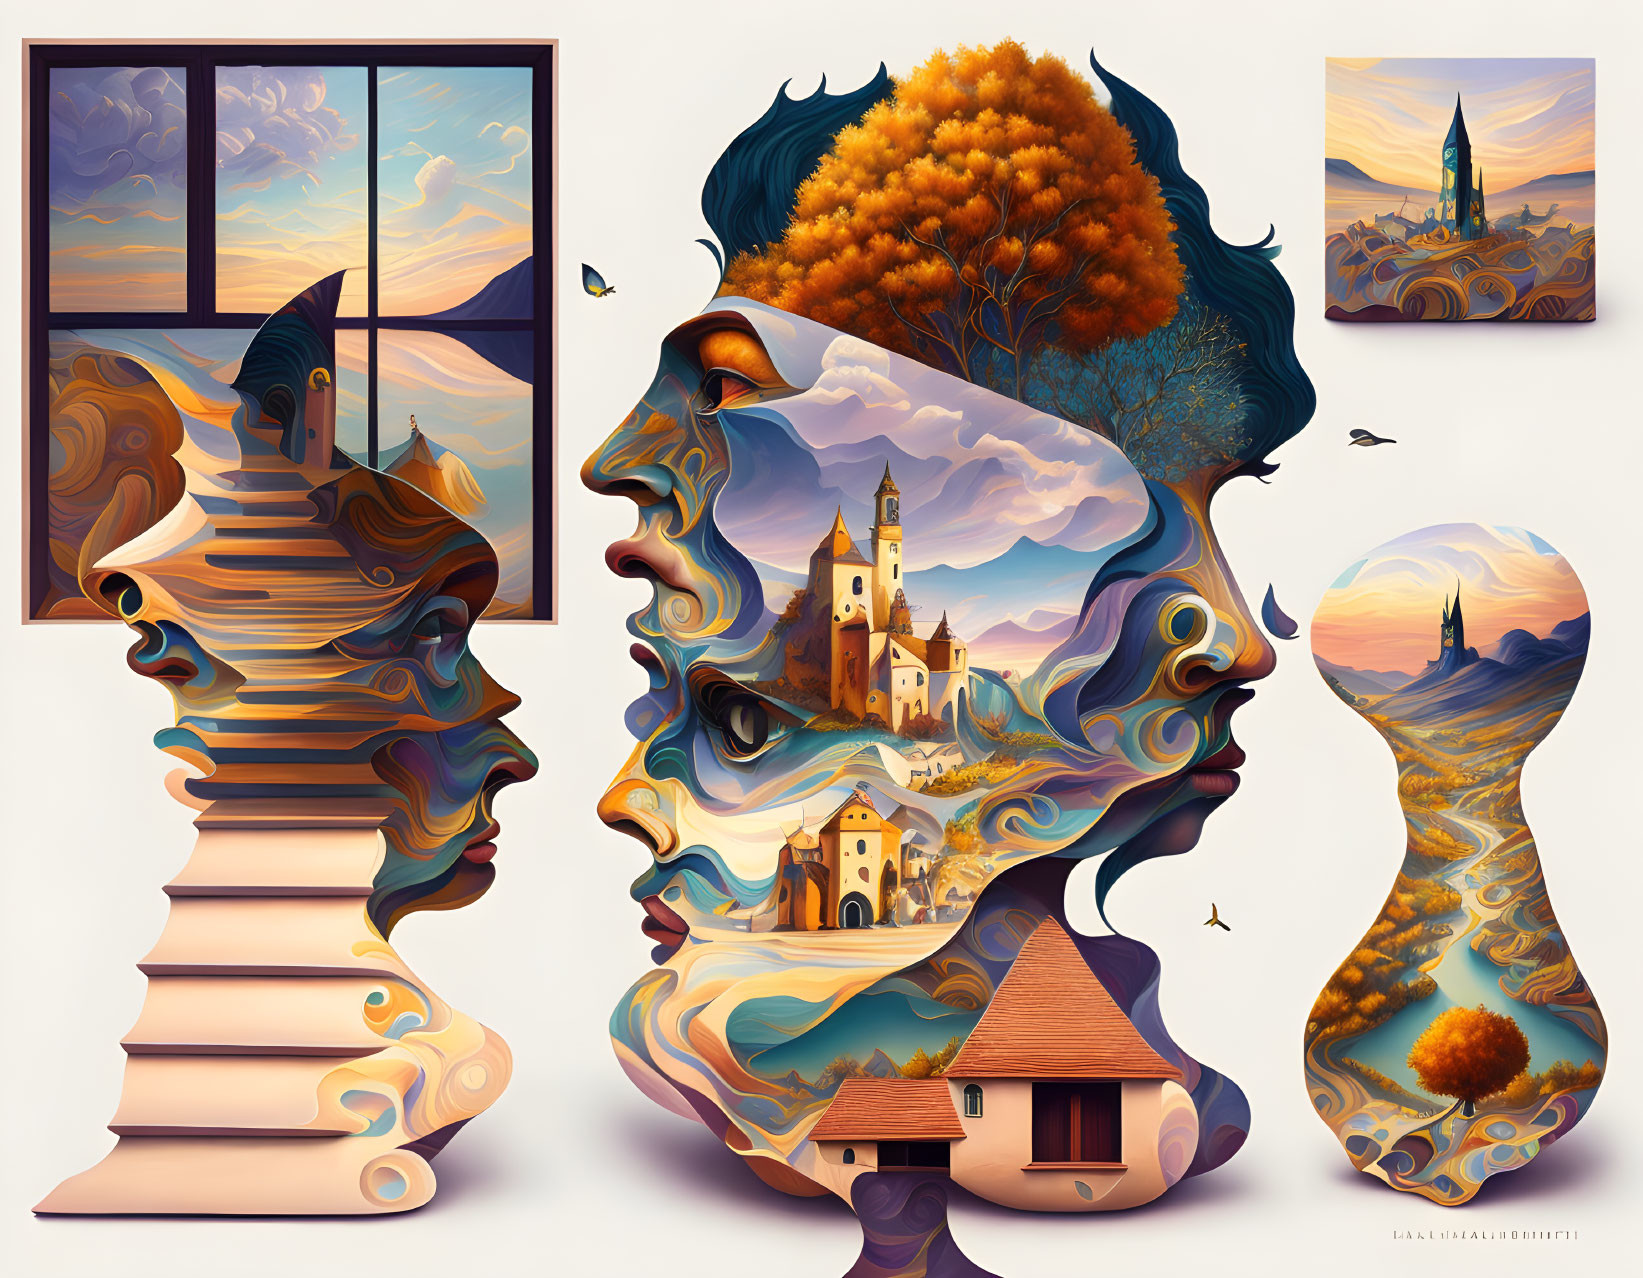 Surreal Artwork: Faces Merge with Landscape in Autumn Palette